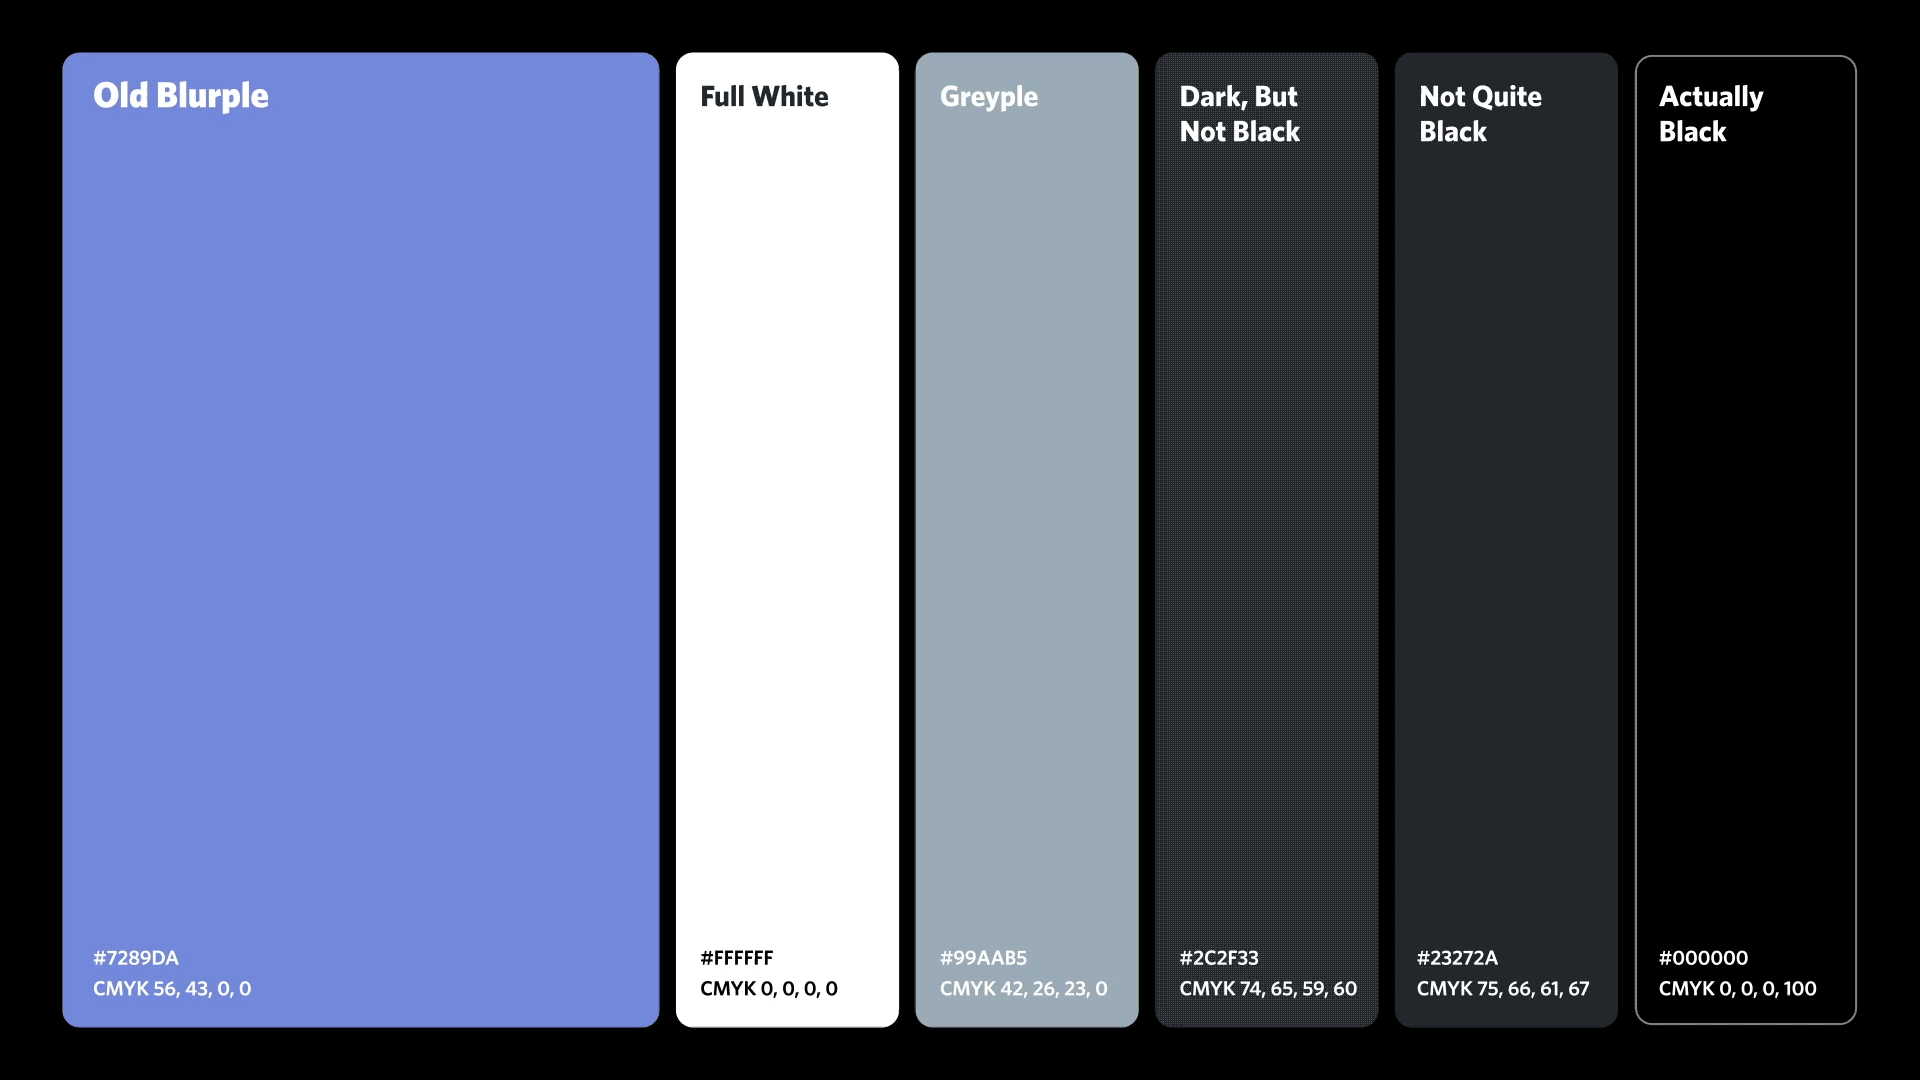 The palette for Discord